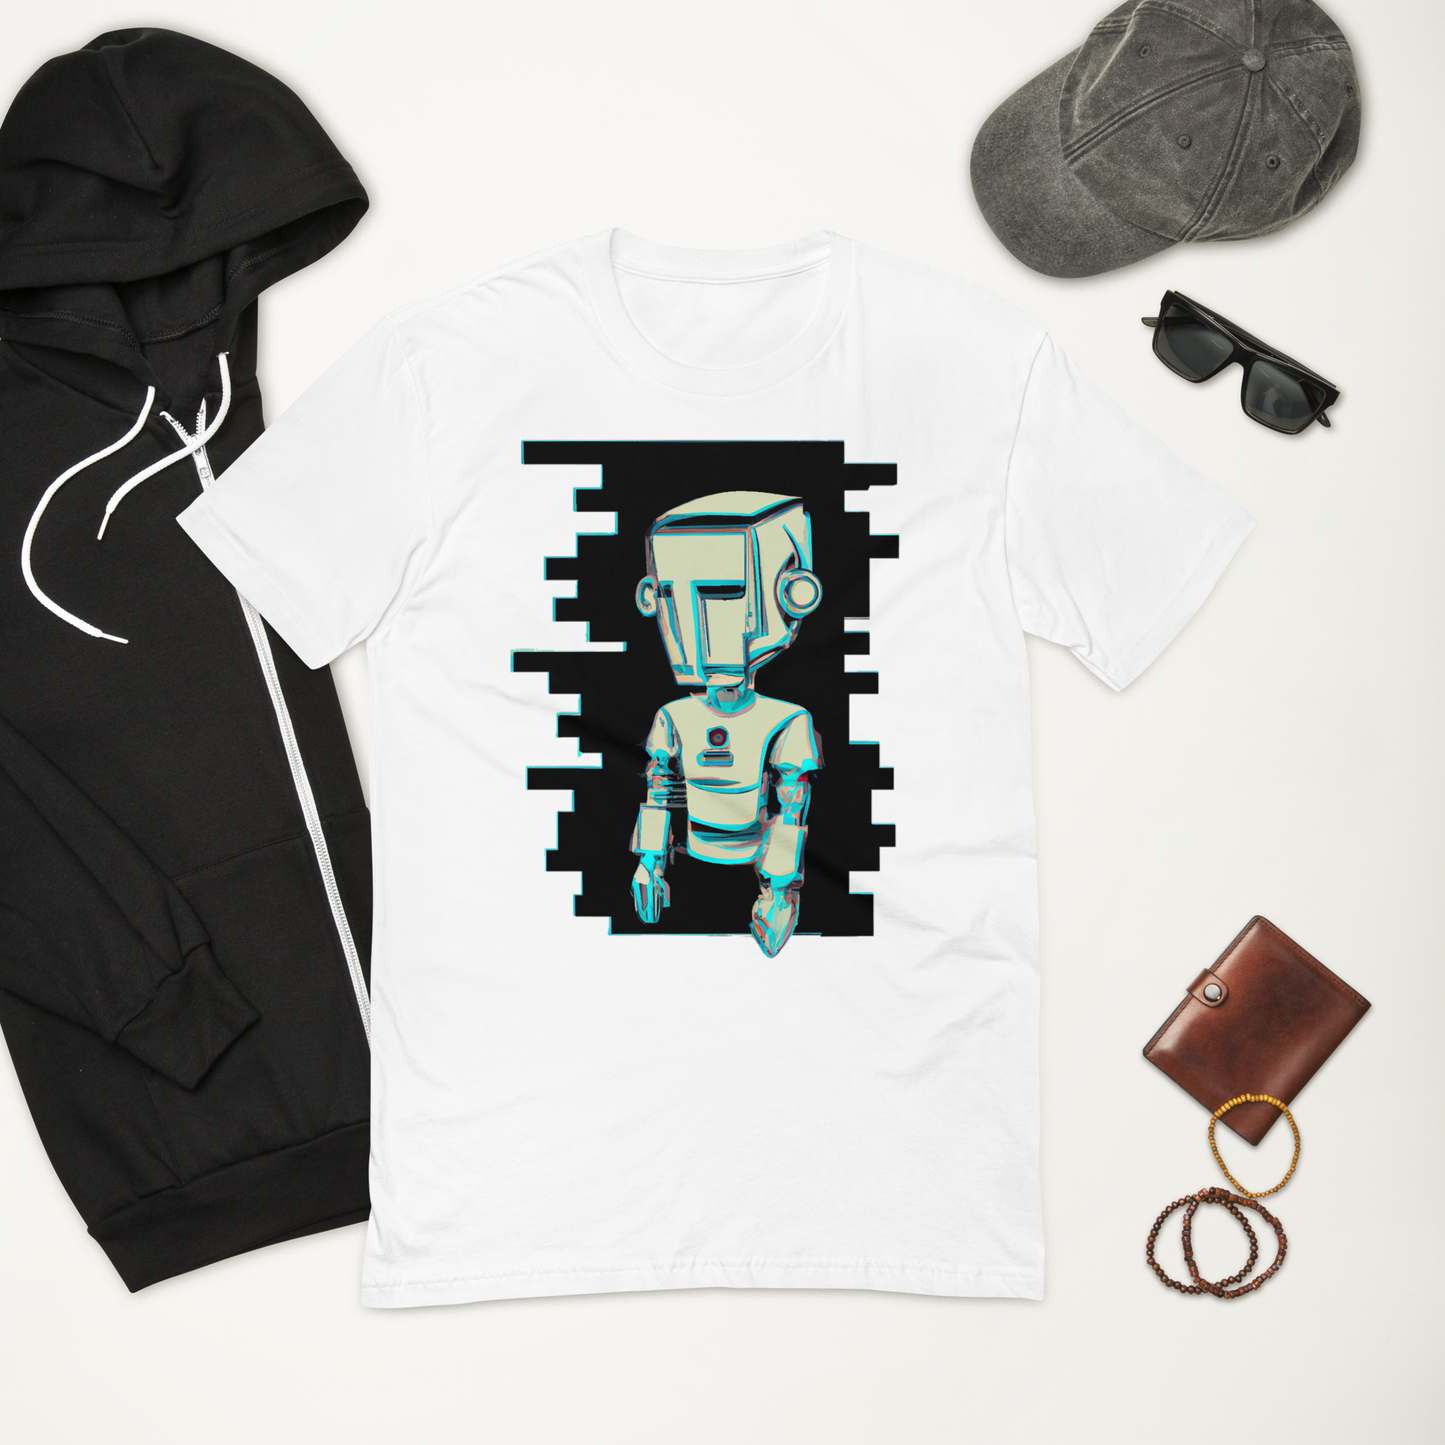 SOULED OUT "Sad Robot 1" Fitted T-shirt